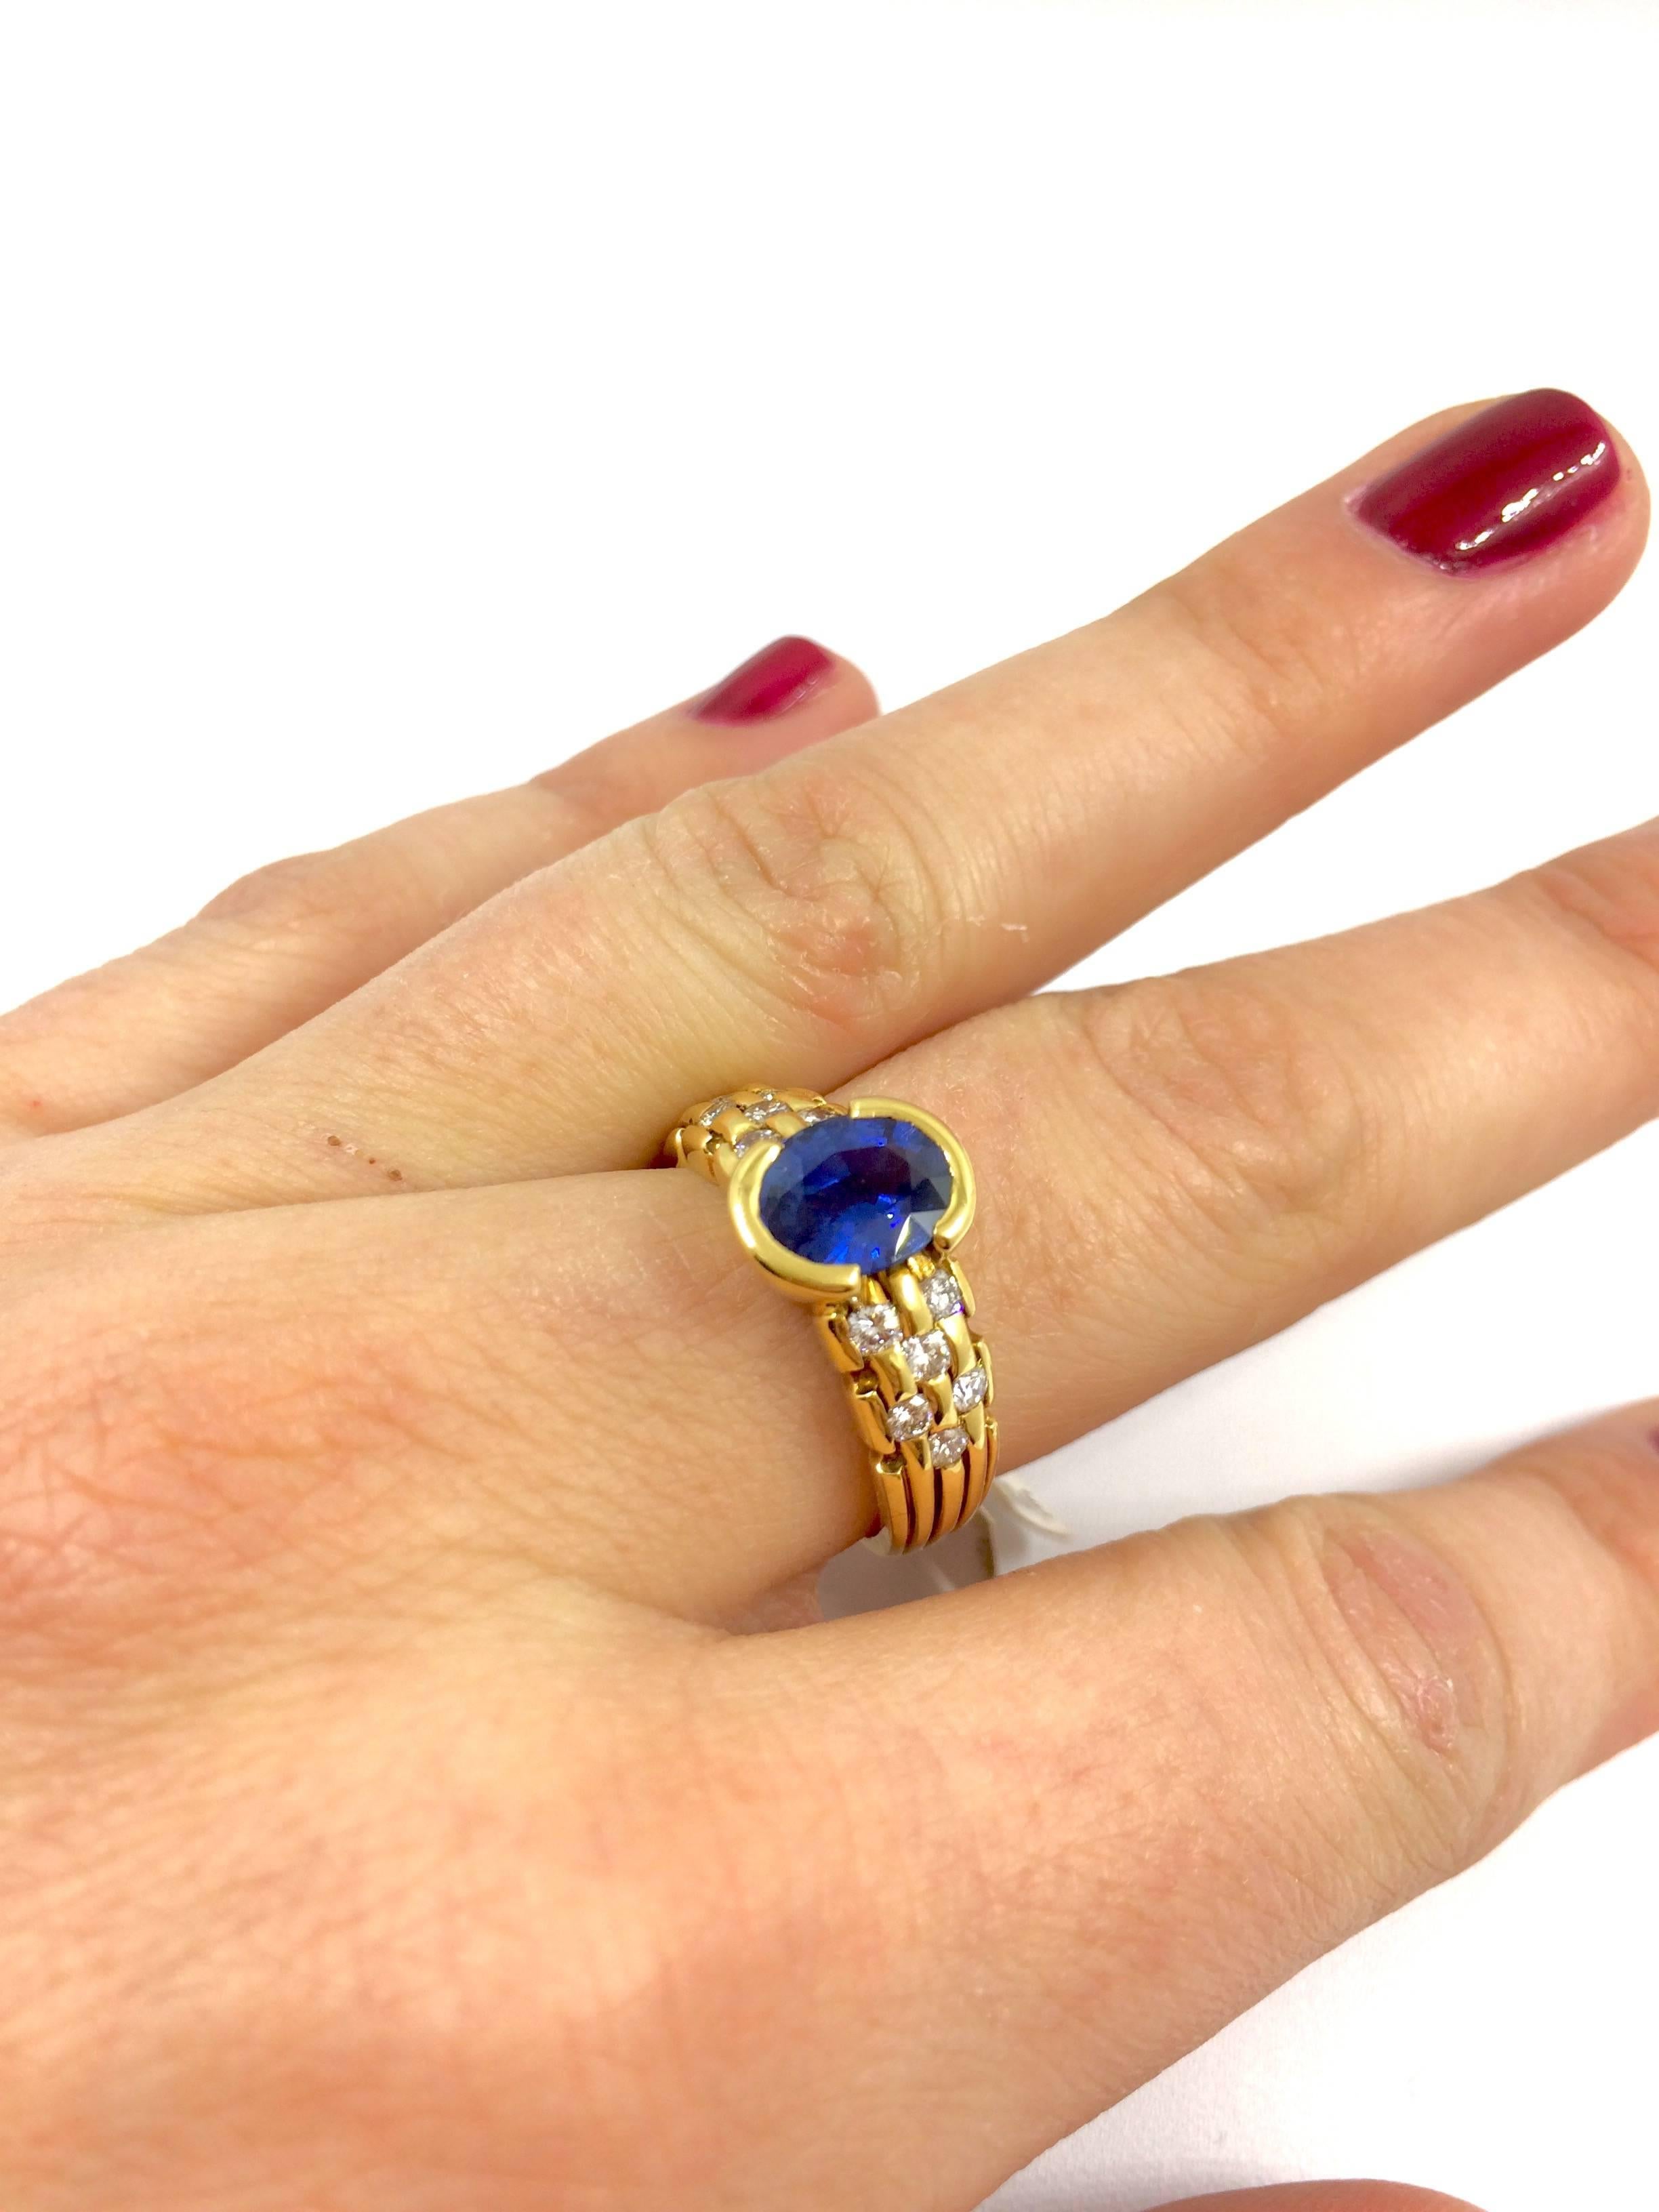 A yellow gold ring set in the middle with a blue Ceylon sapphire surrounded by 12 brilliant cut diamonds.
Sapphire Weight: 1.63 carat
Total Diamonds Weight: 0.42 carat
Net Weight: 6.50 grams
Finger Size: 6.5 (can be sized)